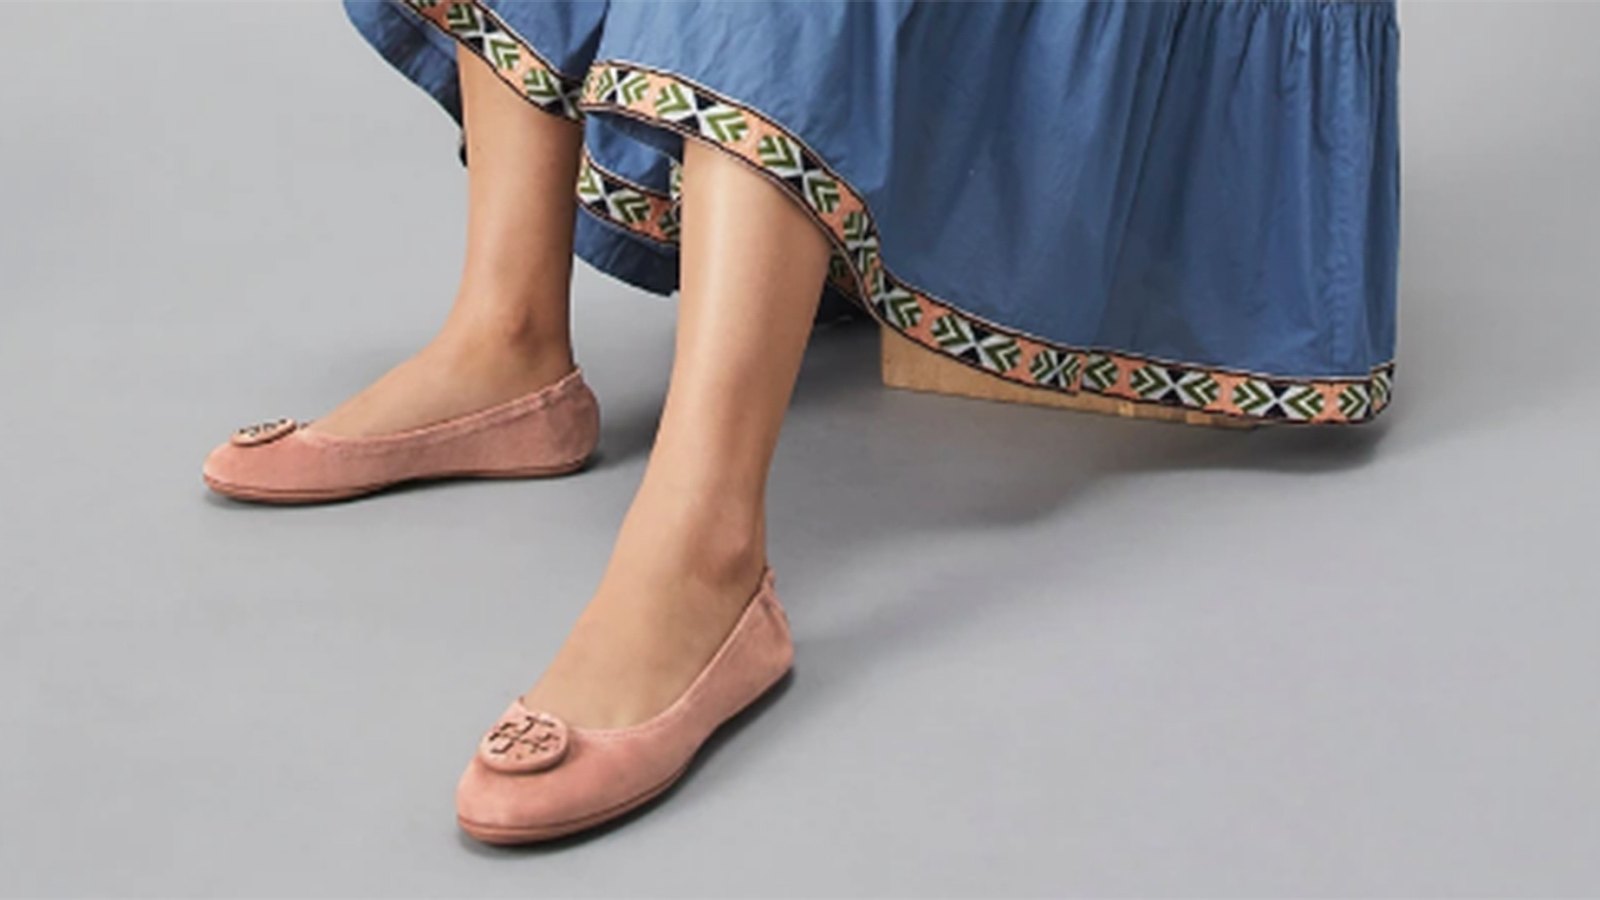 inch inflation Fortov Tory Burch Minnie Flats on Sale: Where to Find Them